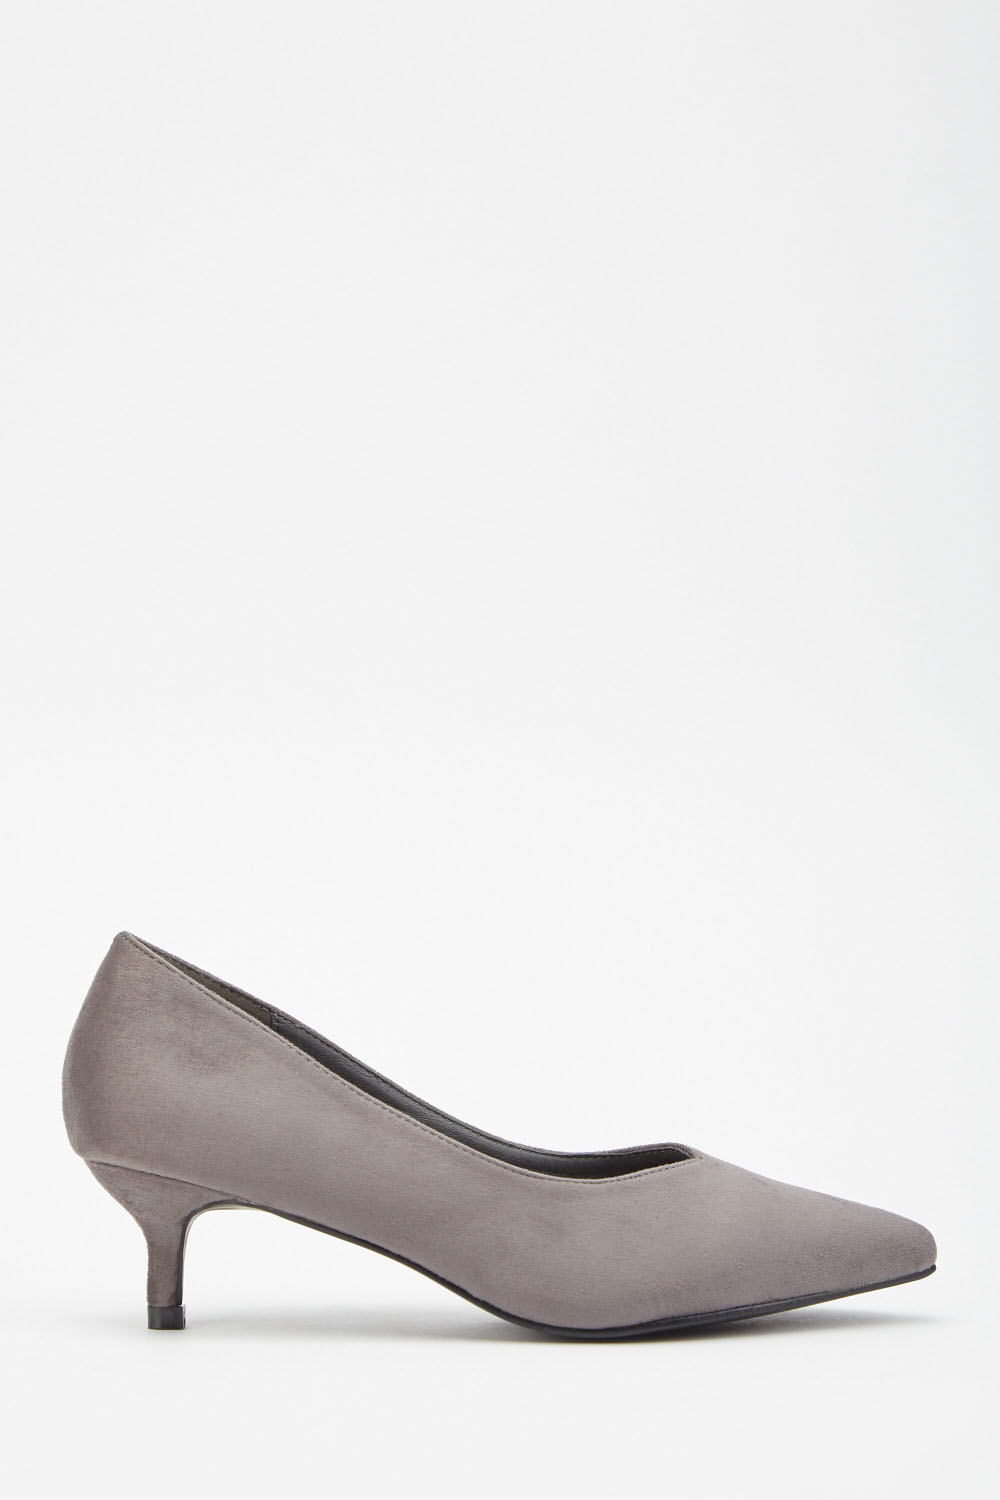 grey small heeled shoes